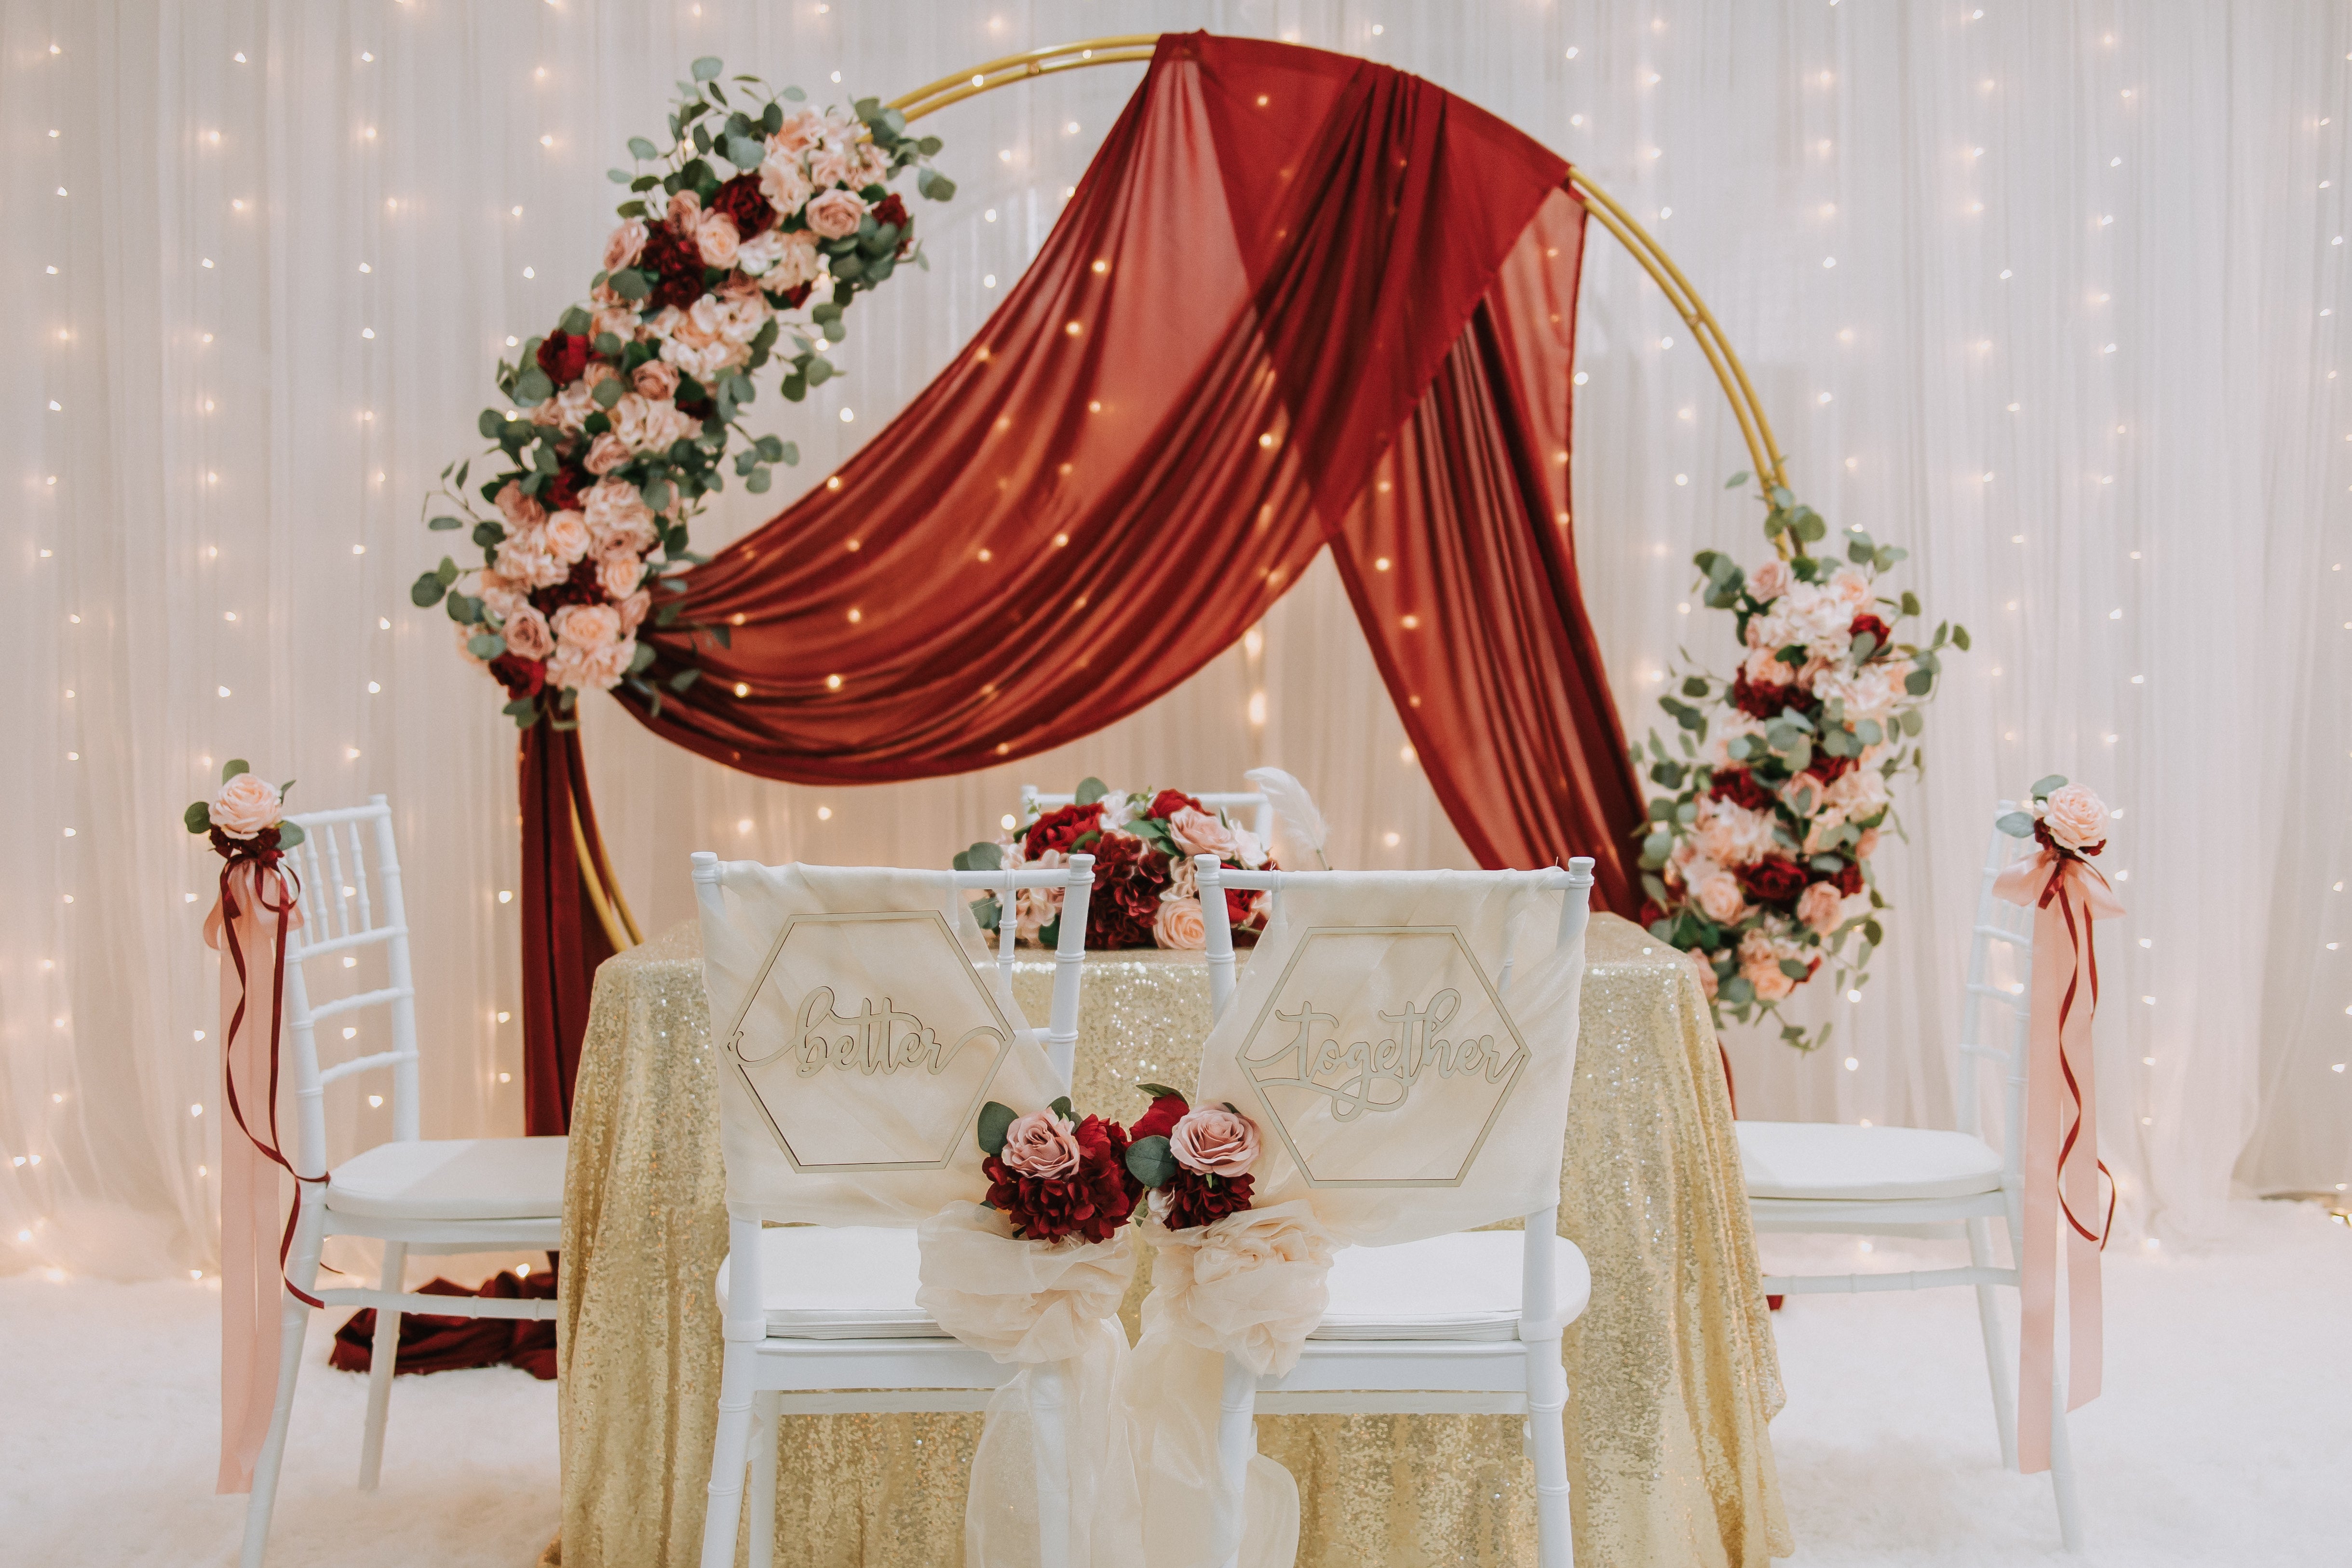 Sweet and Simple Home Solemnisation/ROM Decor in Singapore - Pink Red Gold Theme with Round Arch & Fairy-lights